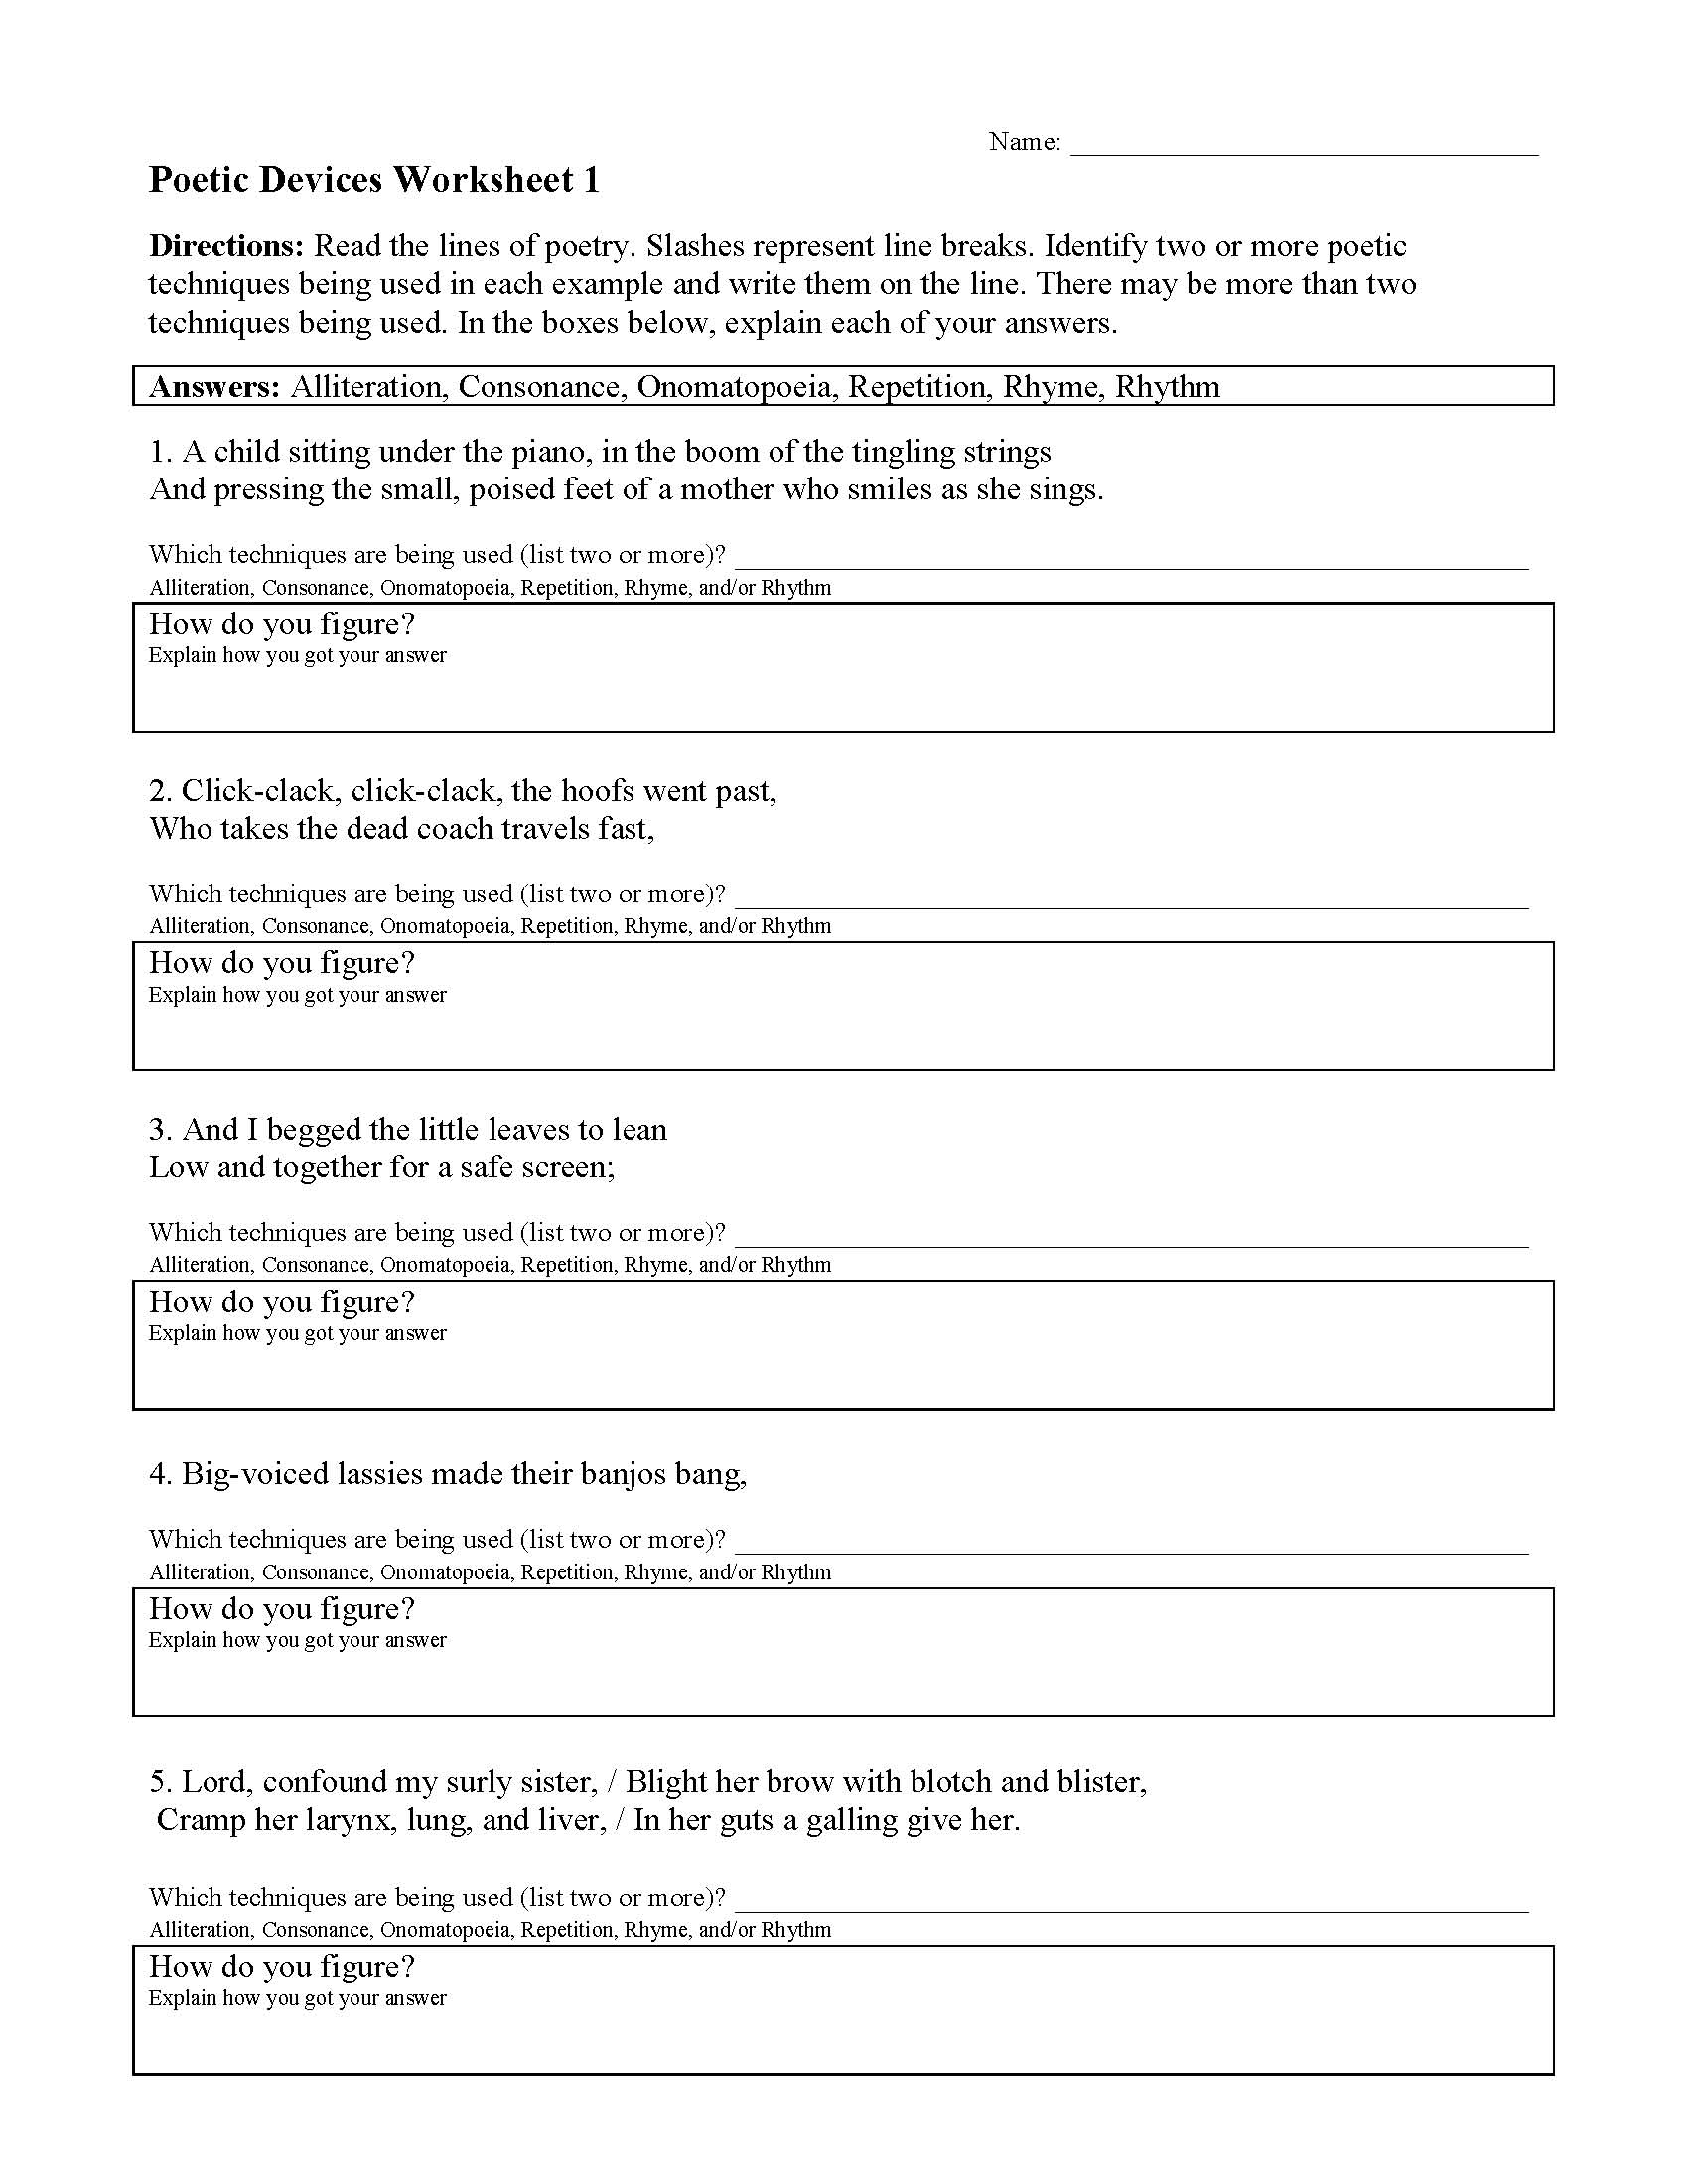 Poetic Devices Worksheet 20  Reading Activity Throughout Poetic Devices Worksheet 1